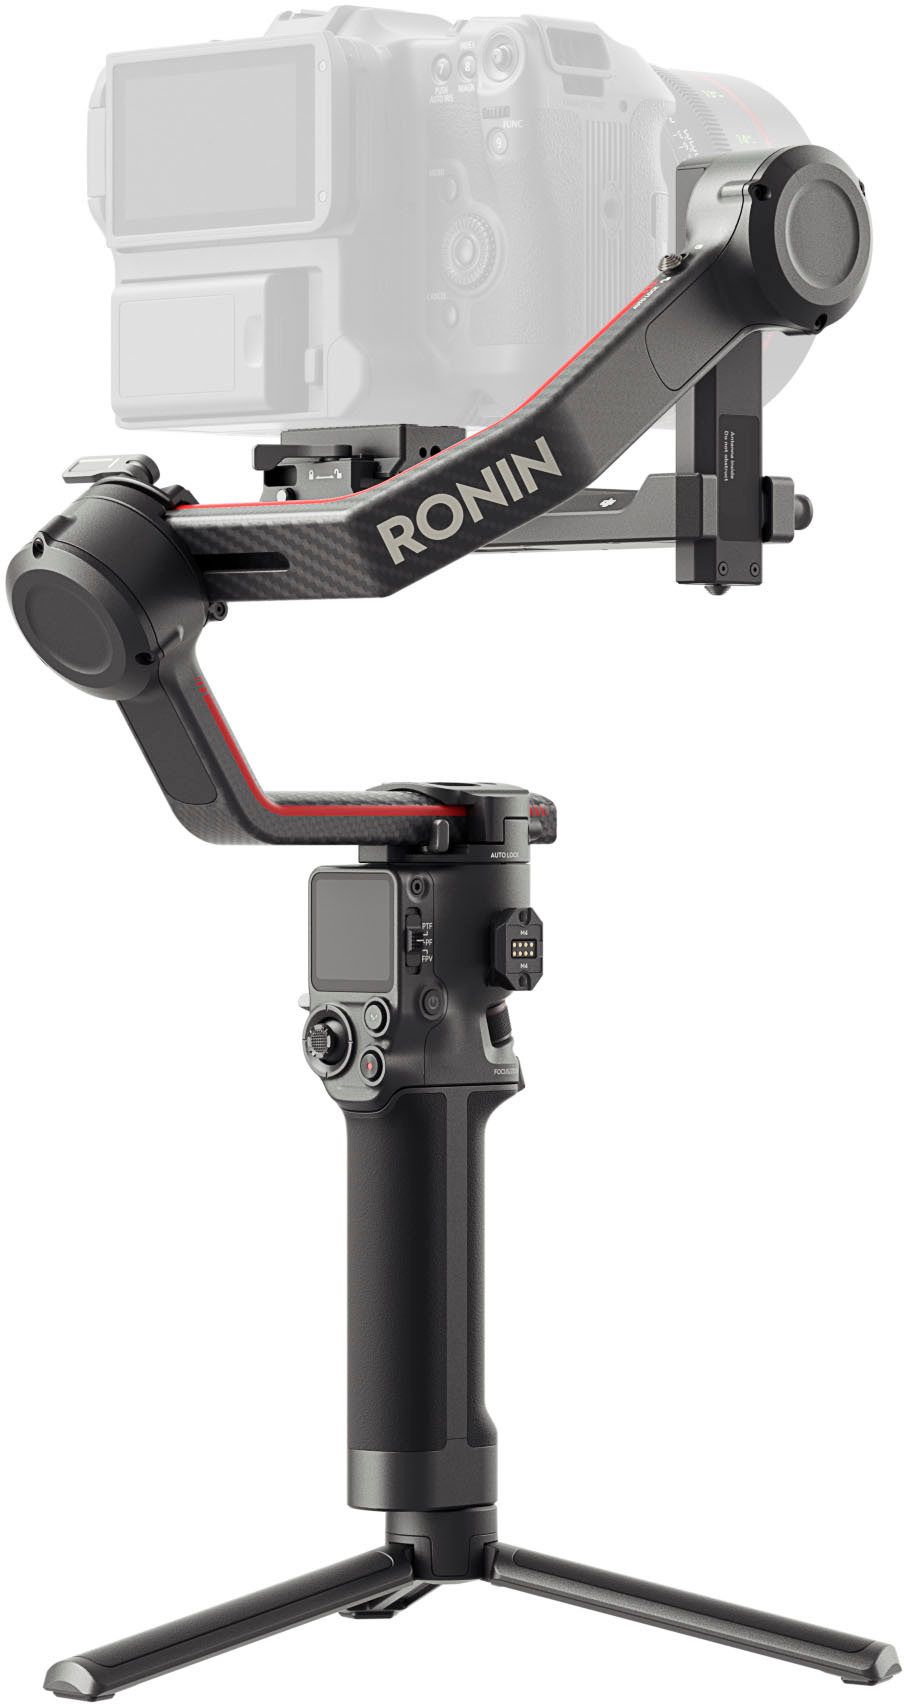 Image of DJI - RS 3 Pro 3-Axis Gimbal Stabilizer - Black